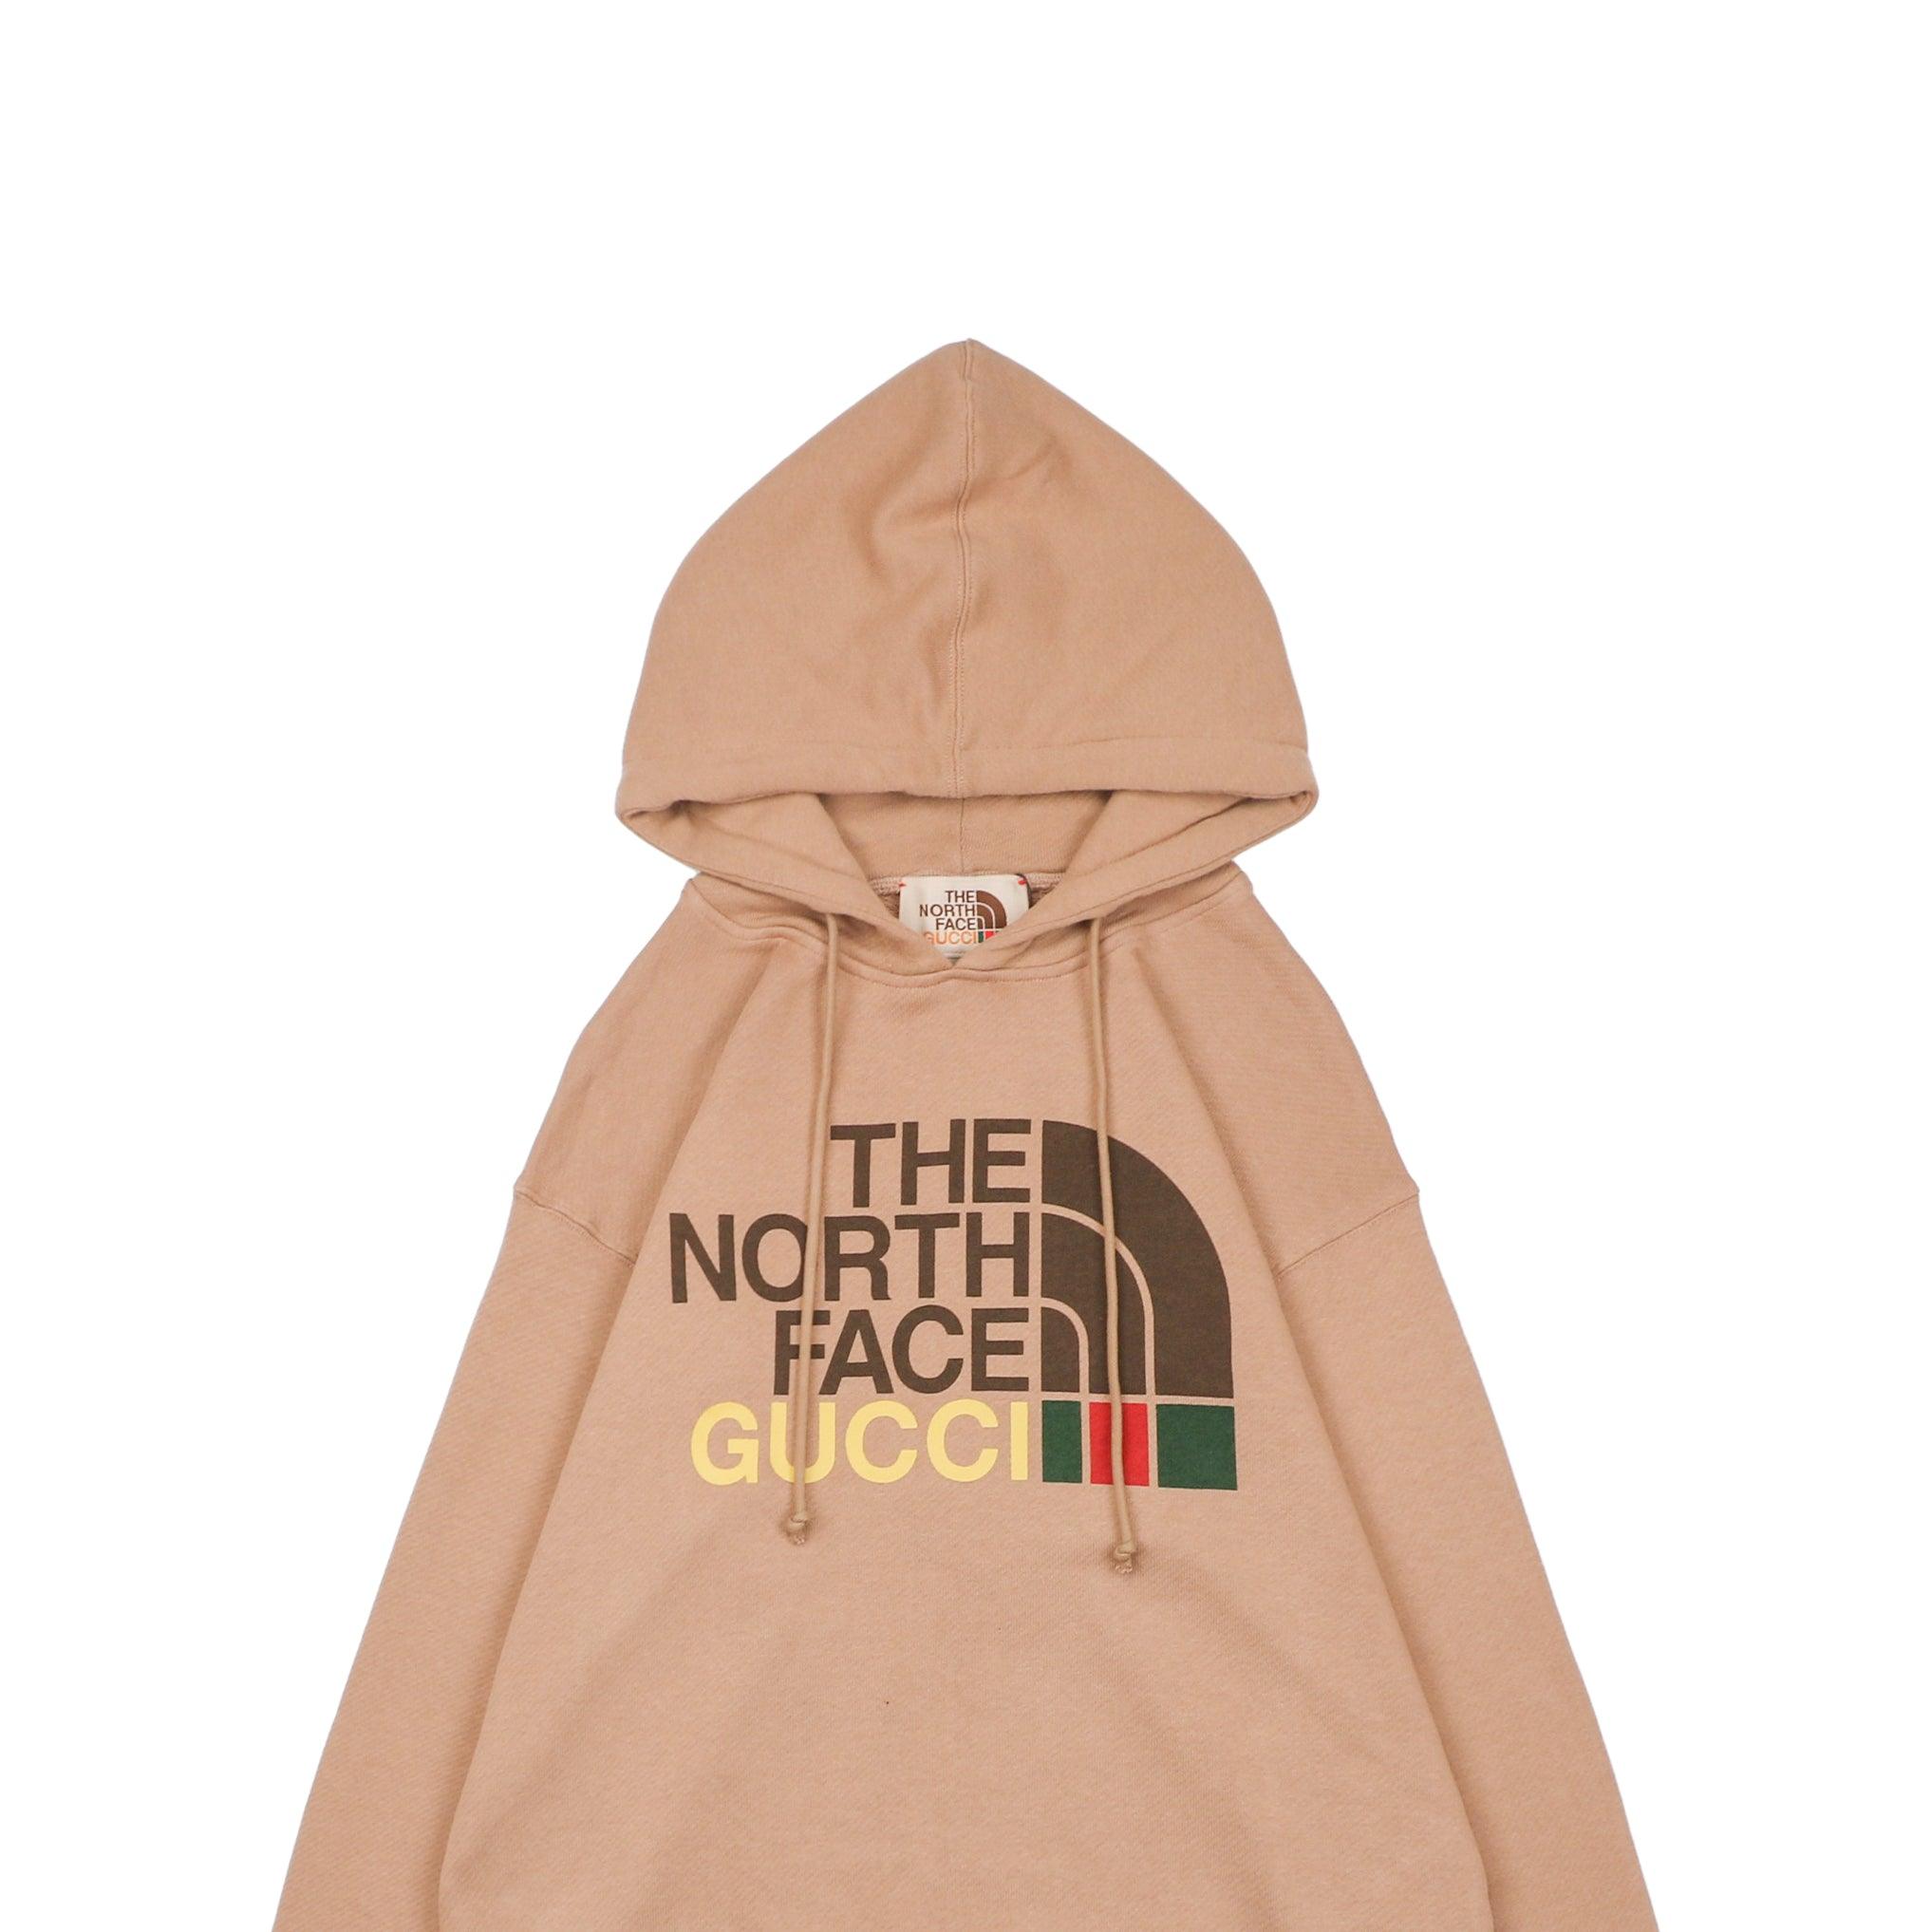 The North Face x Gucci Hoodie: A Fusion of Style and Functionality, by  Emma J